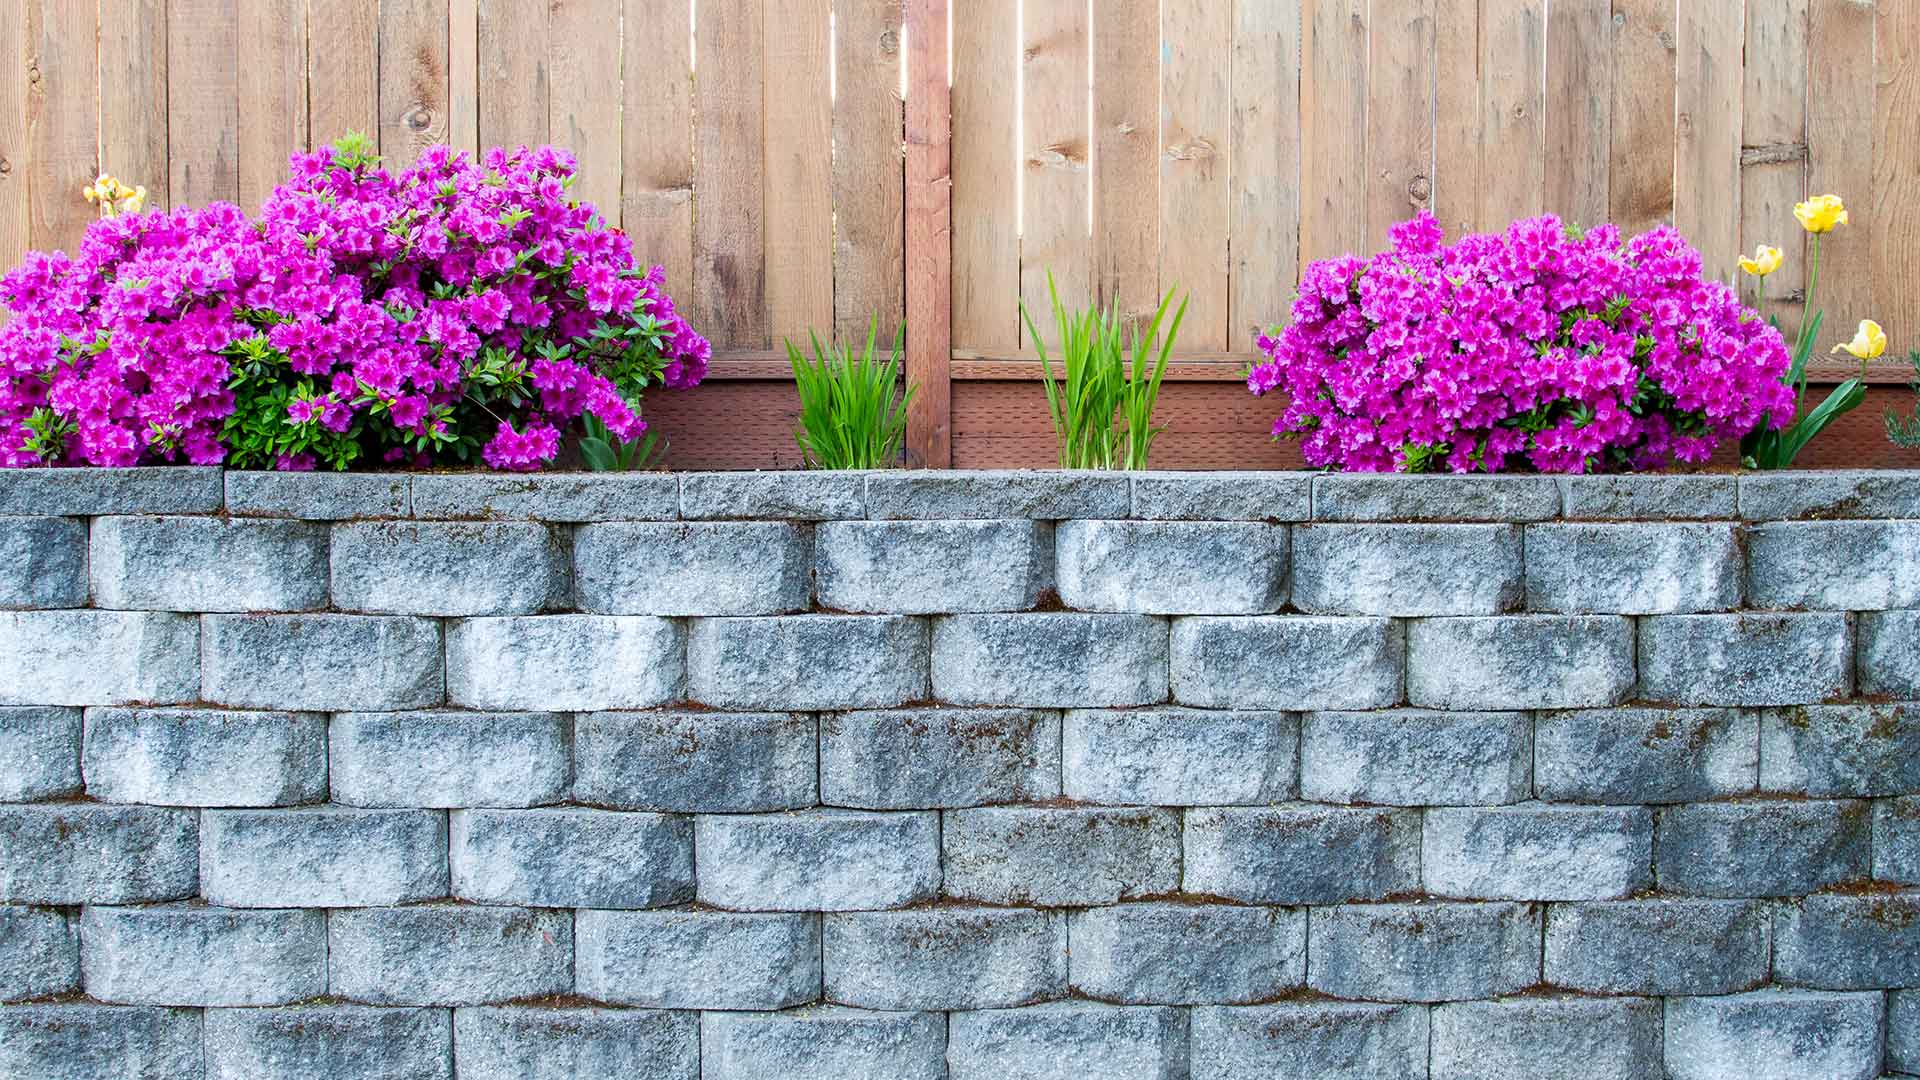 Custom retaining wall and annual flowers at a home in O'Fallon, Illinois.